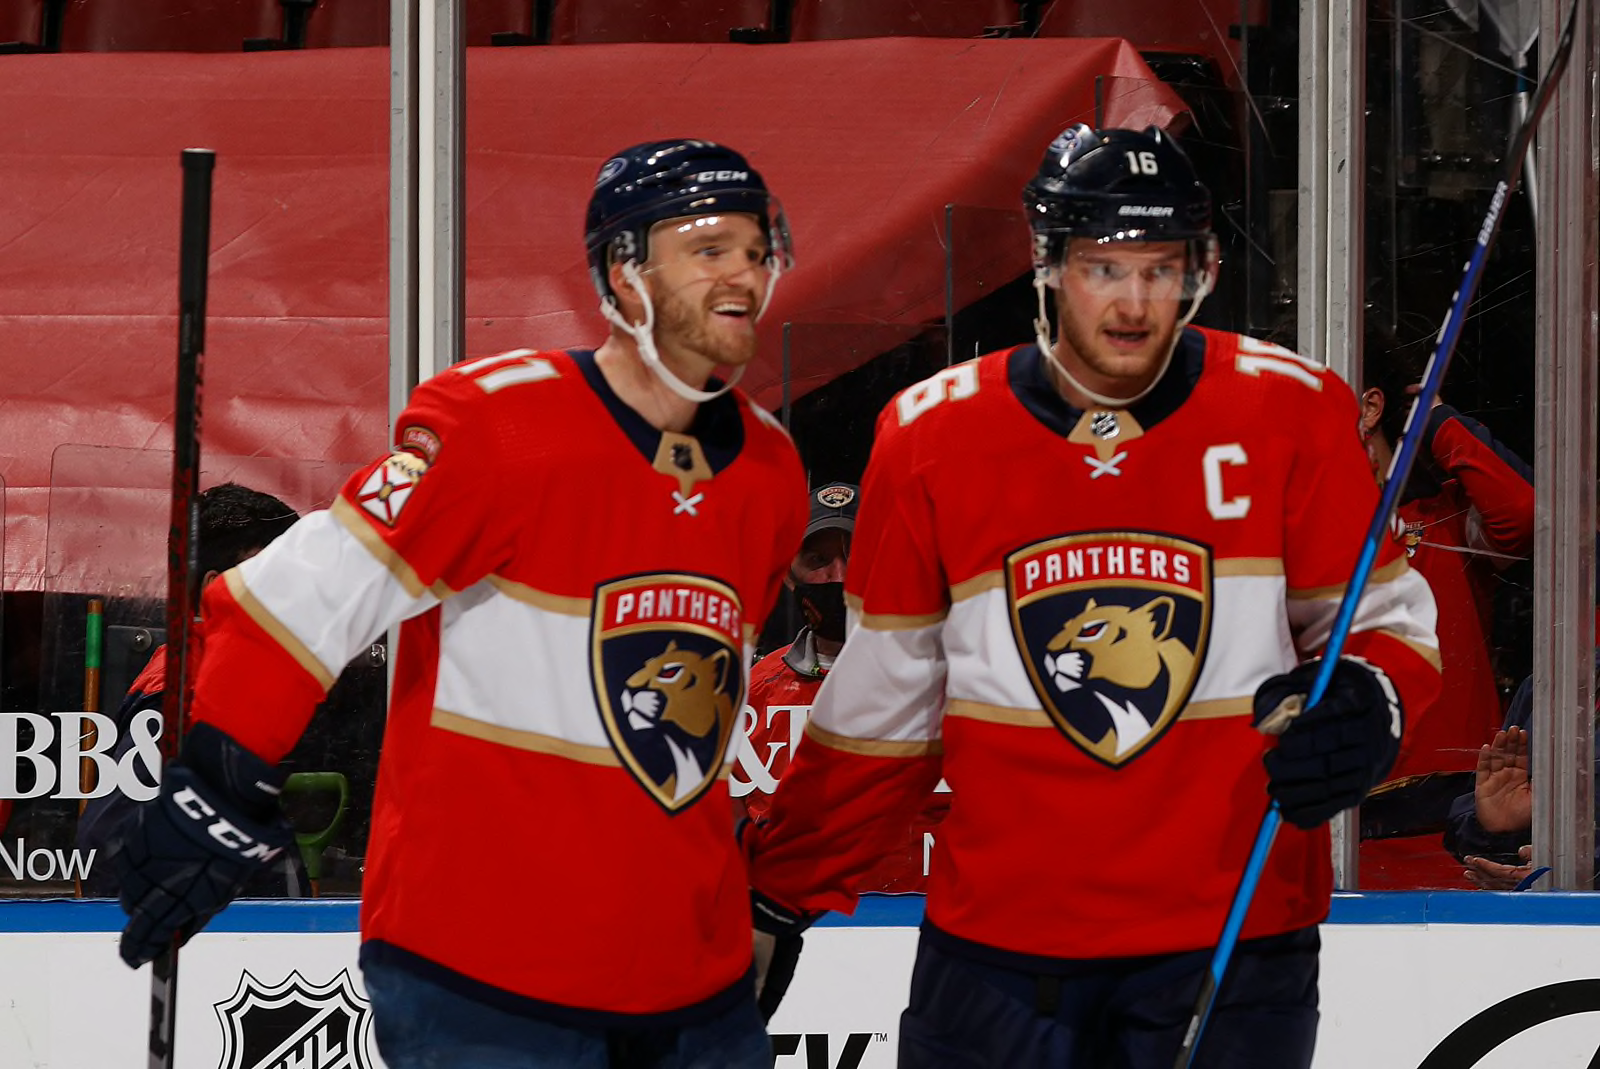 NHL: Huberdeau helps Panthers beat Capitals for 1st win - The Mainichi